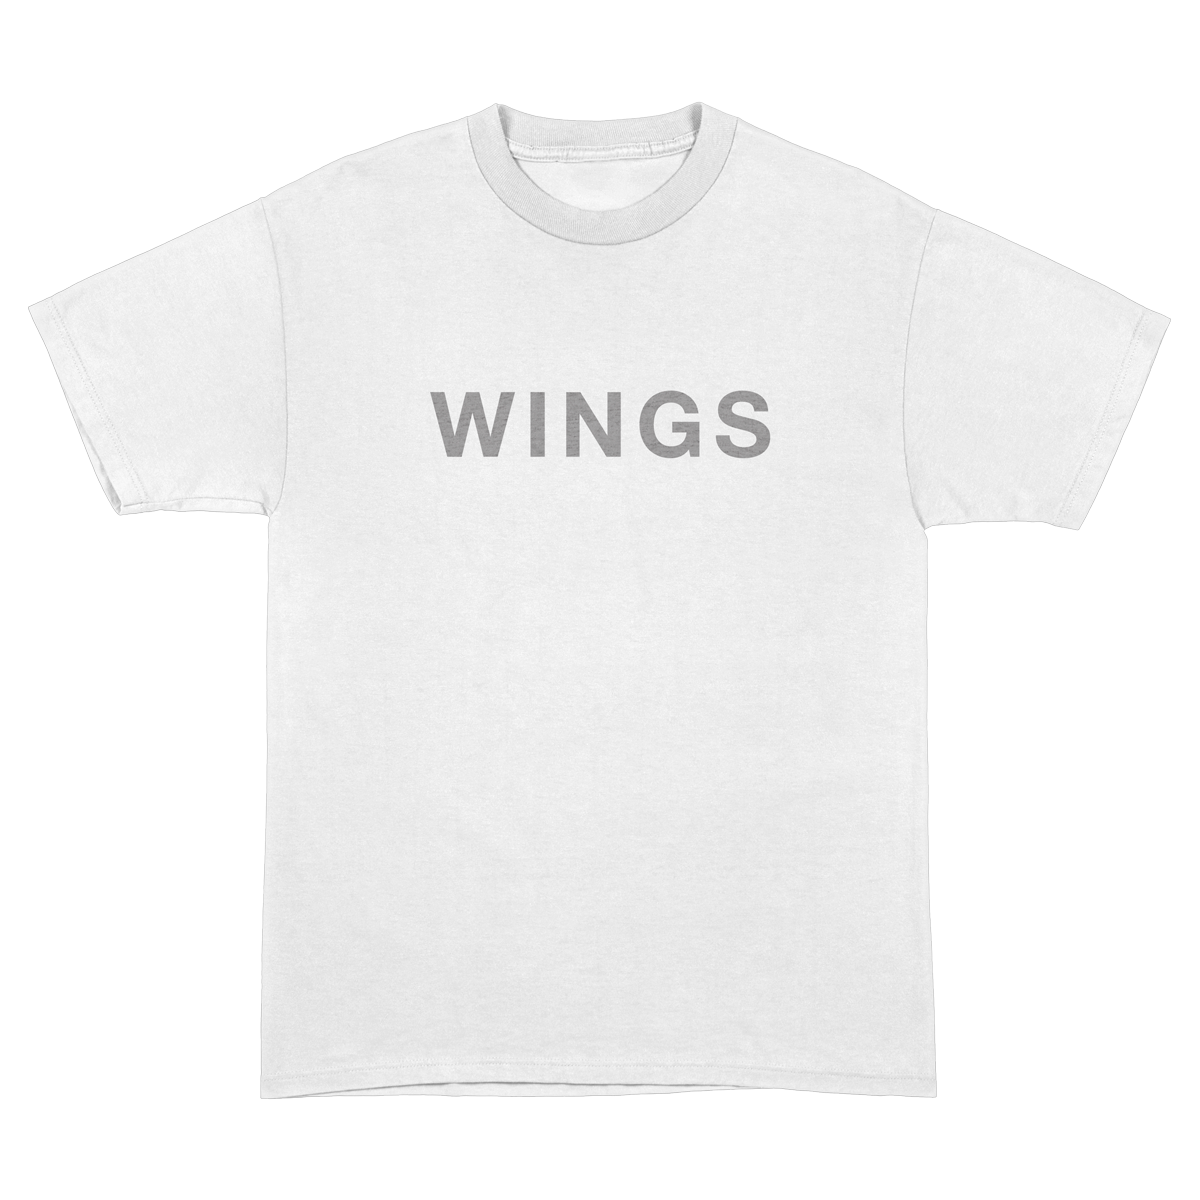 Limited Edition - WINGS Reverse White Tee